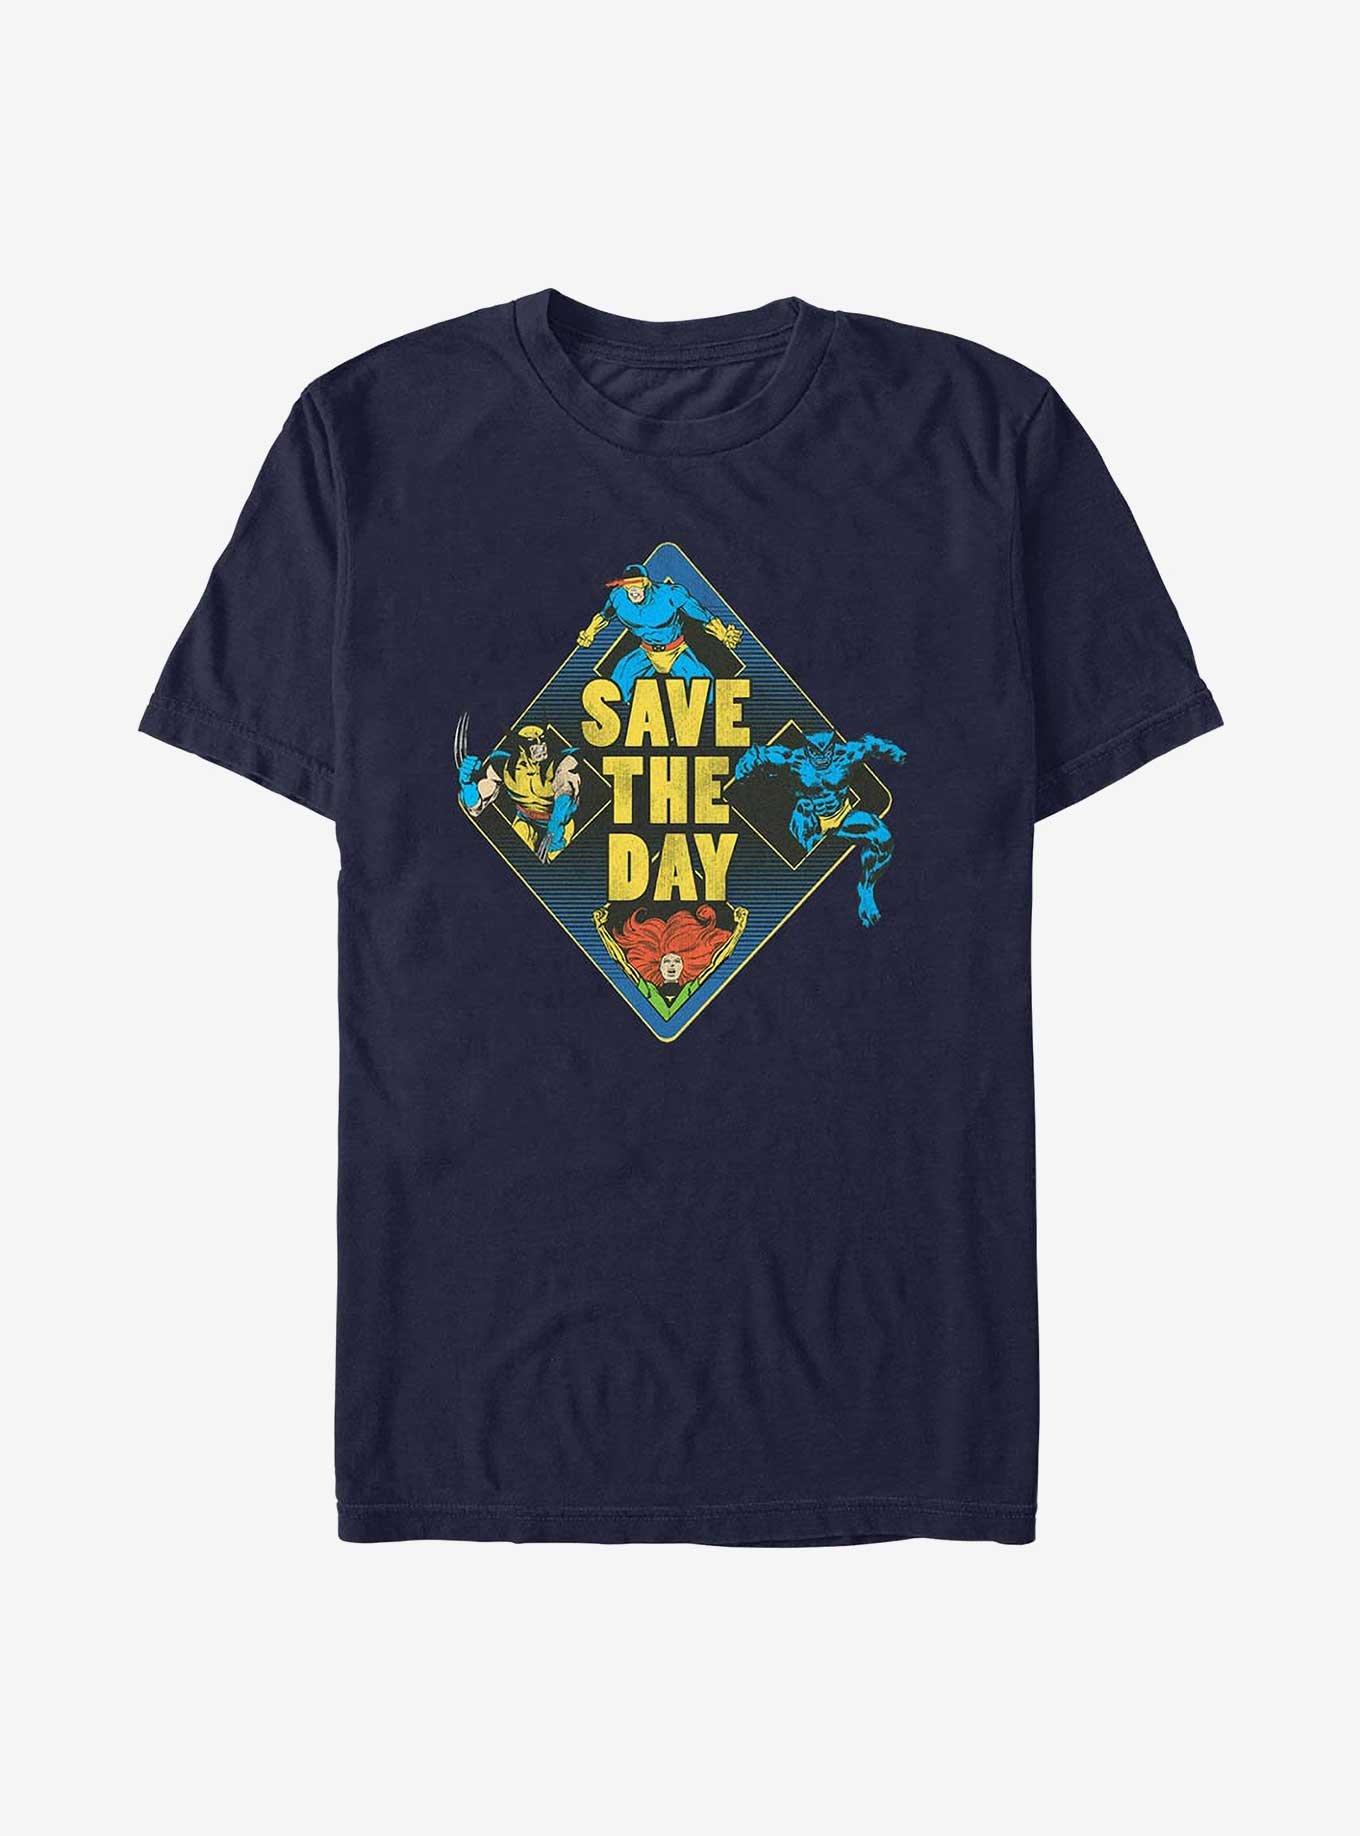 X-Men Save The Day T-Shirt